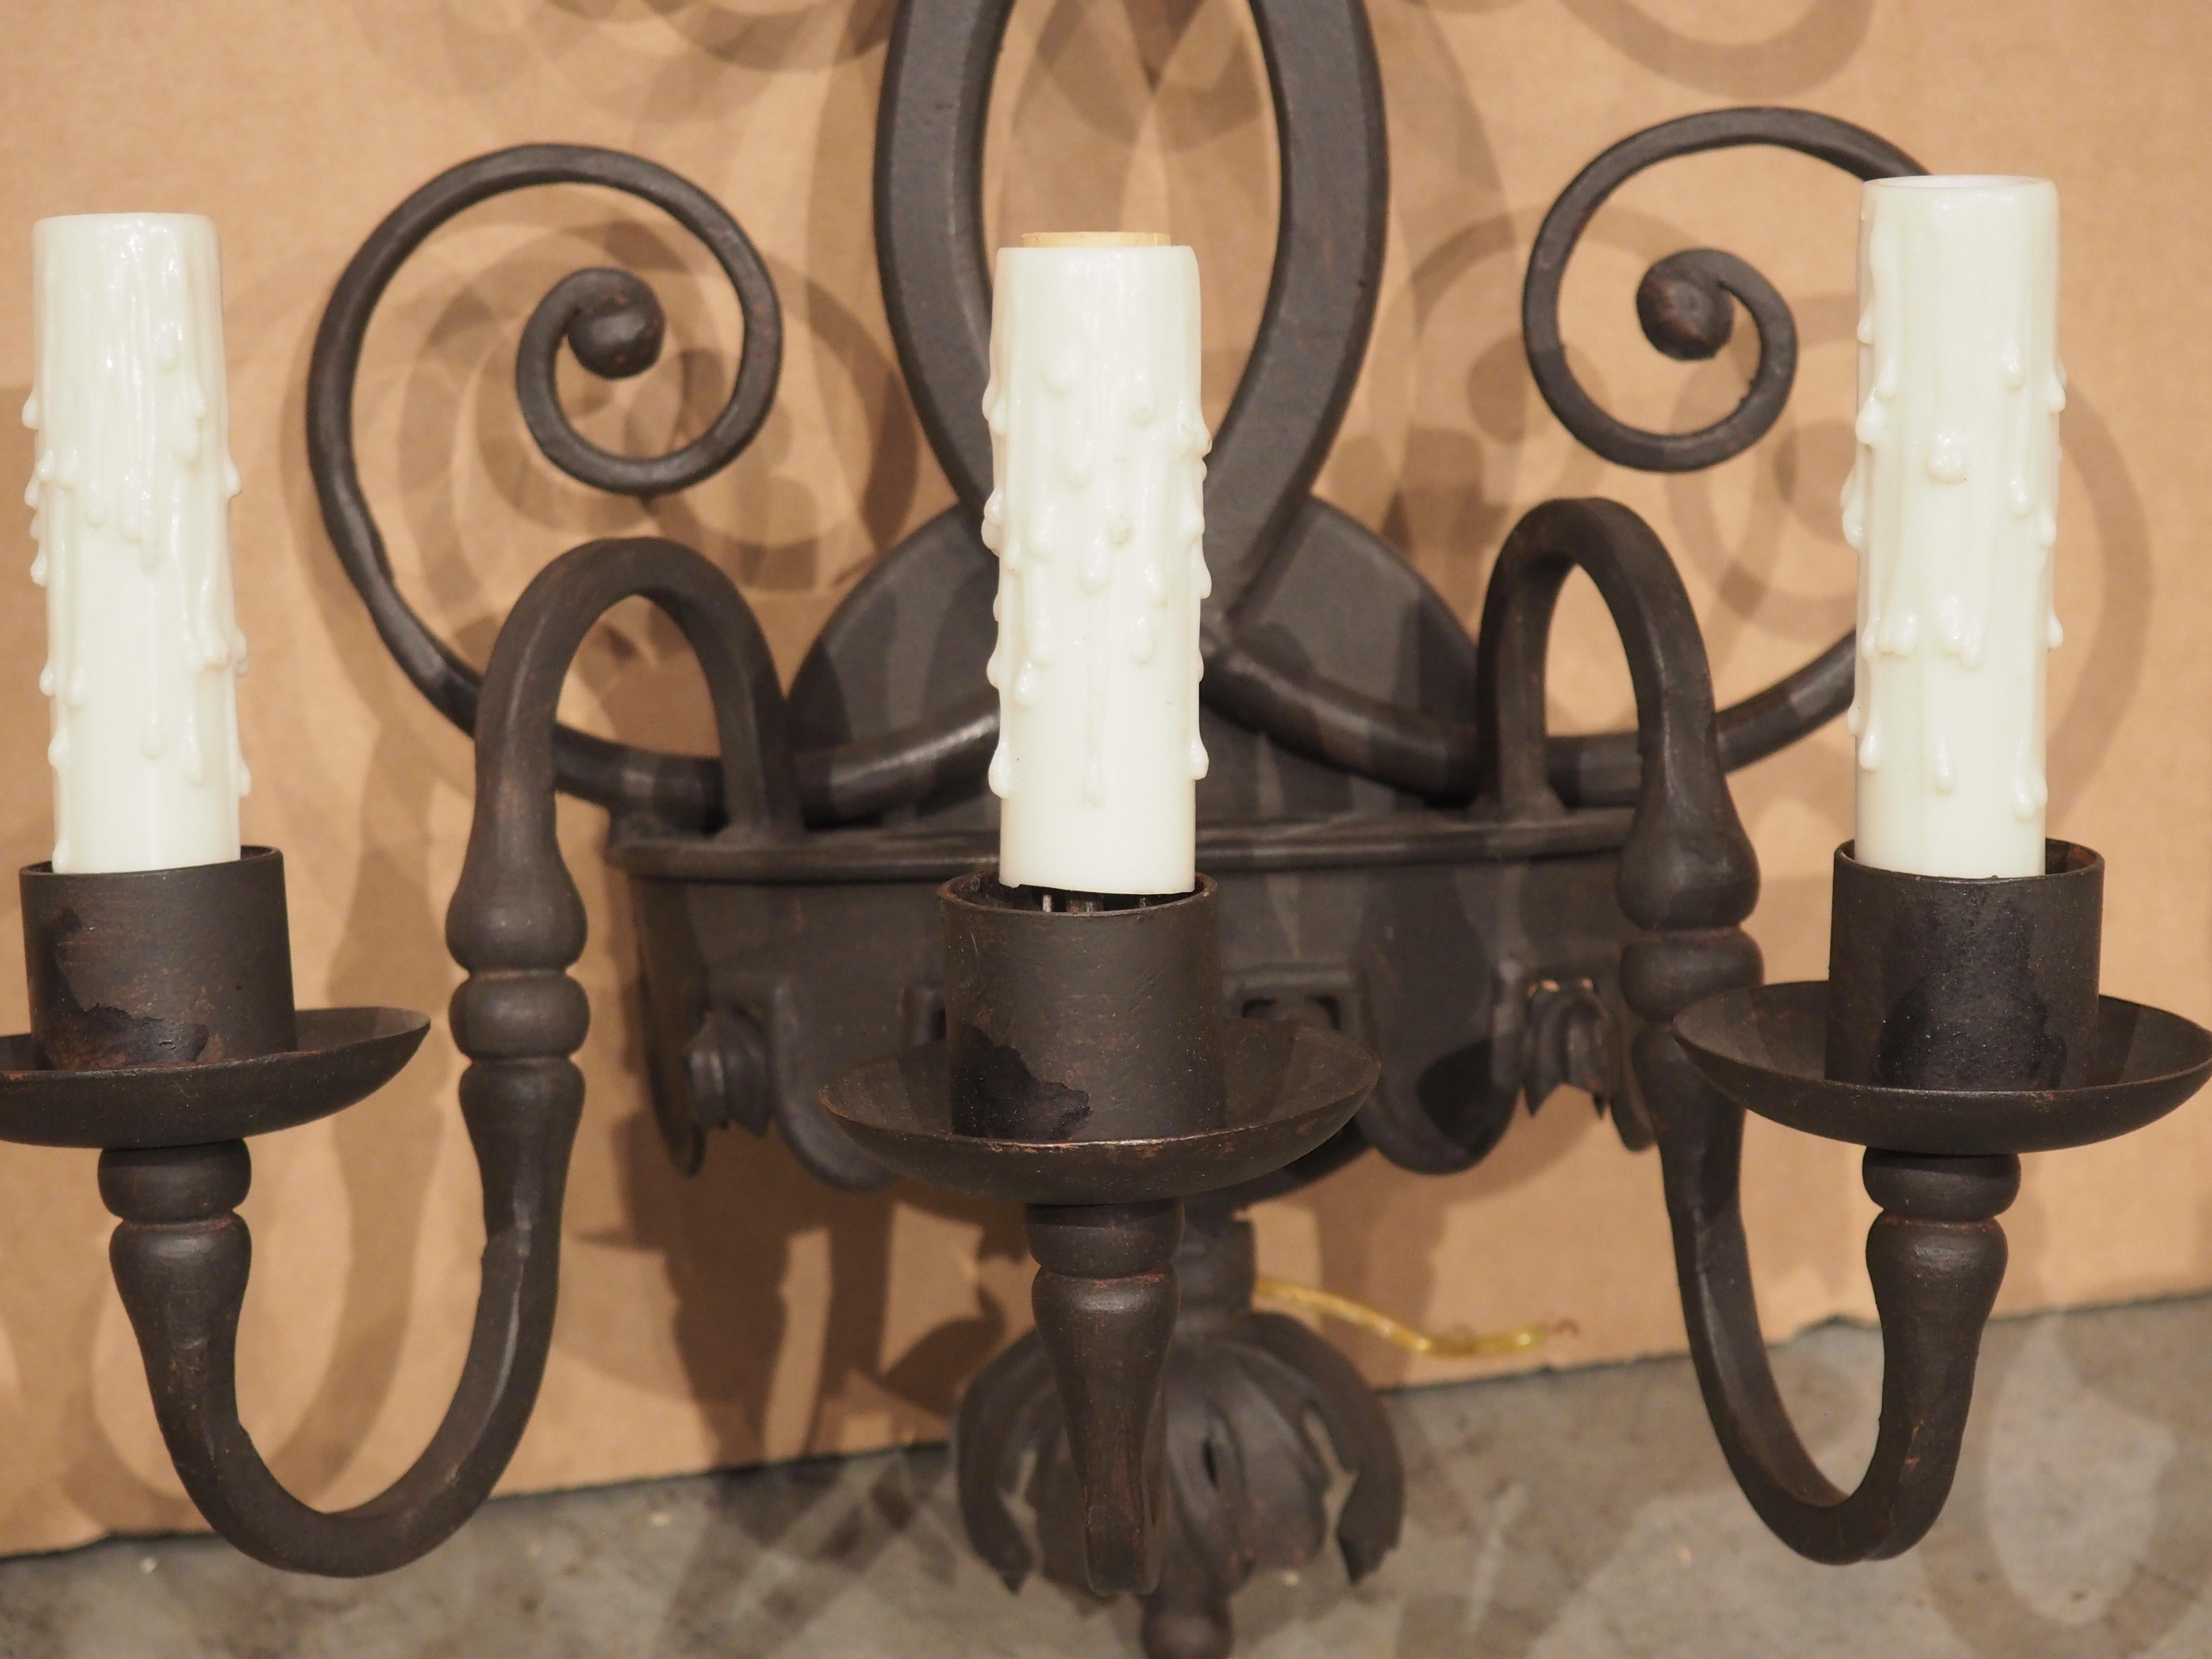 Wrought in the style of Spanish architectural lighting, this iron three-arm wall sconce is topped by white faux candle sleeves rising from saucer bobeches. Each arm has a sinuous S-scroll shape, with a turned transition point. They originate from a